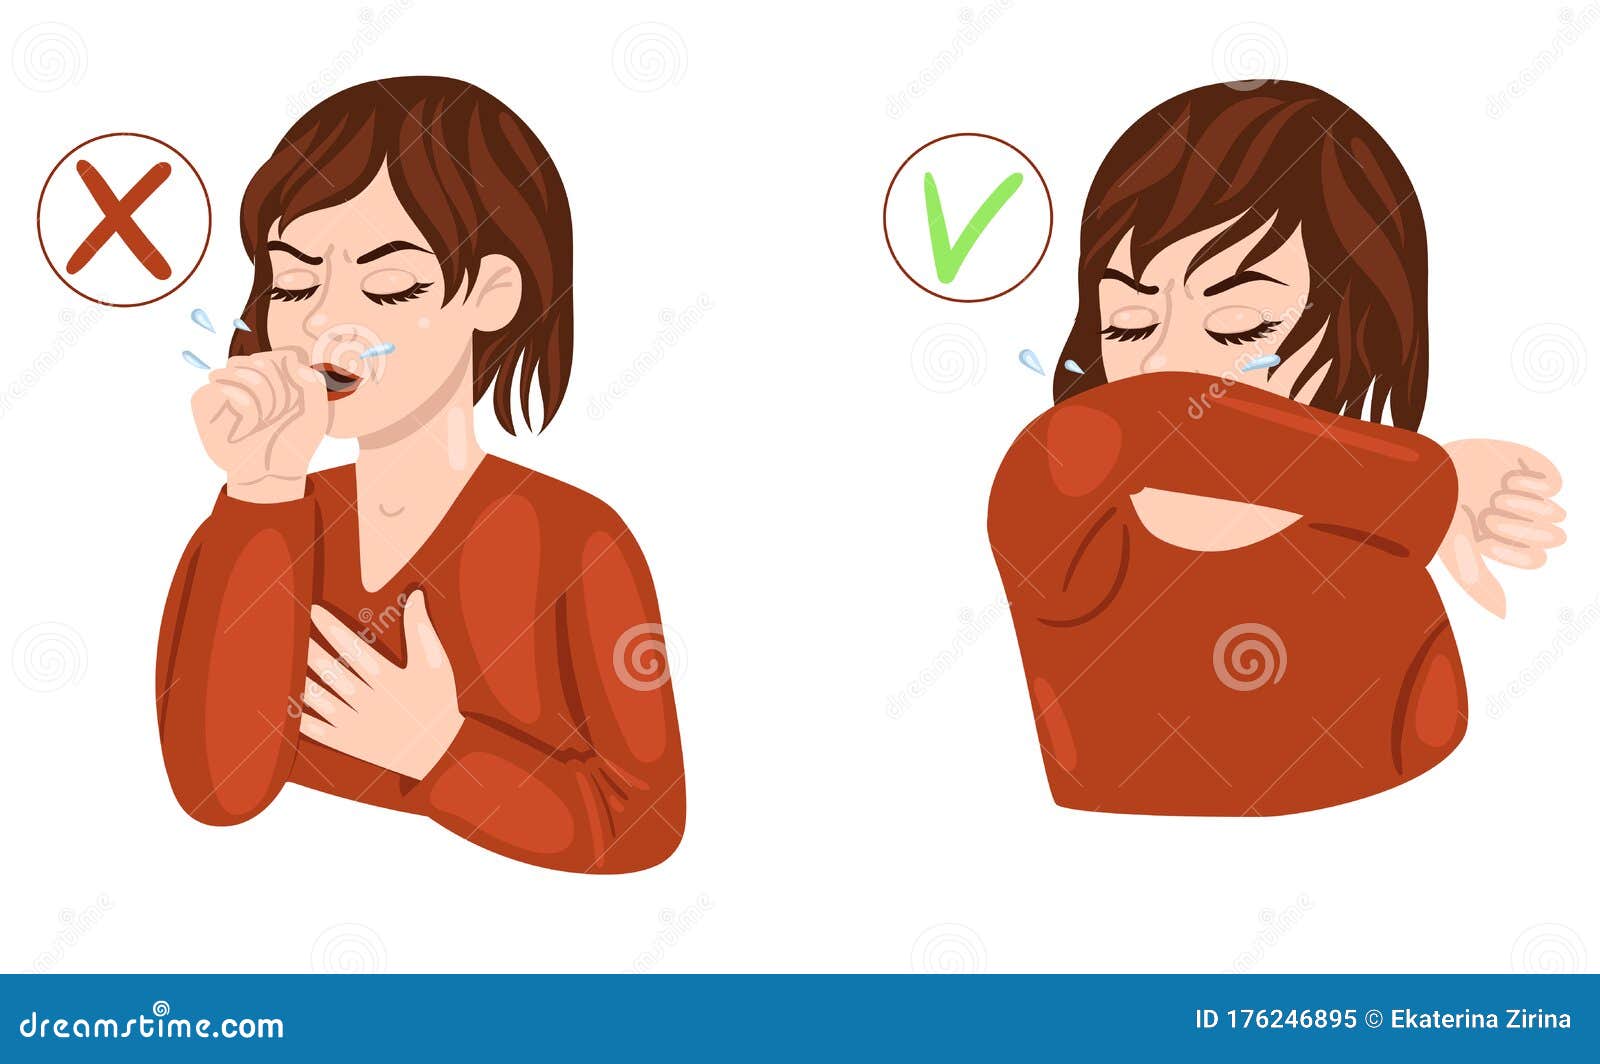 coughing in arm cartoon